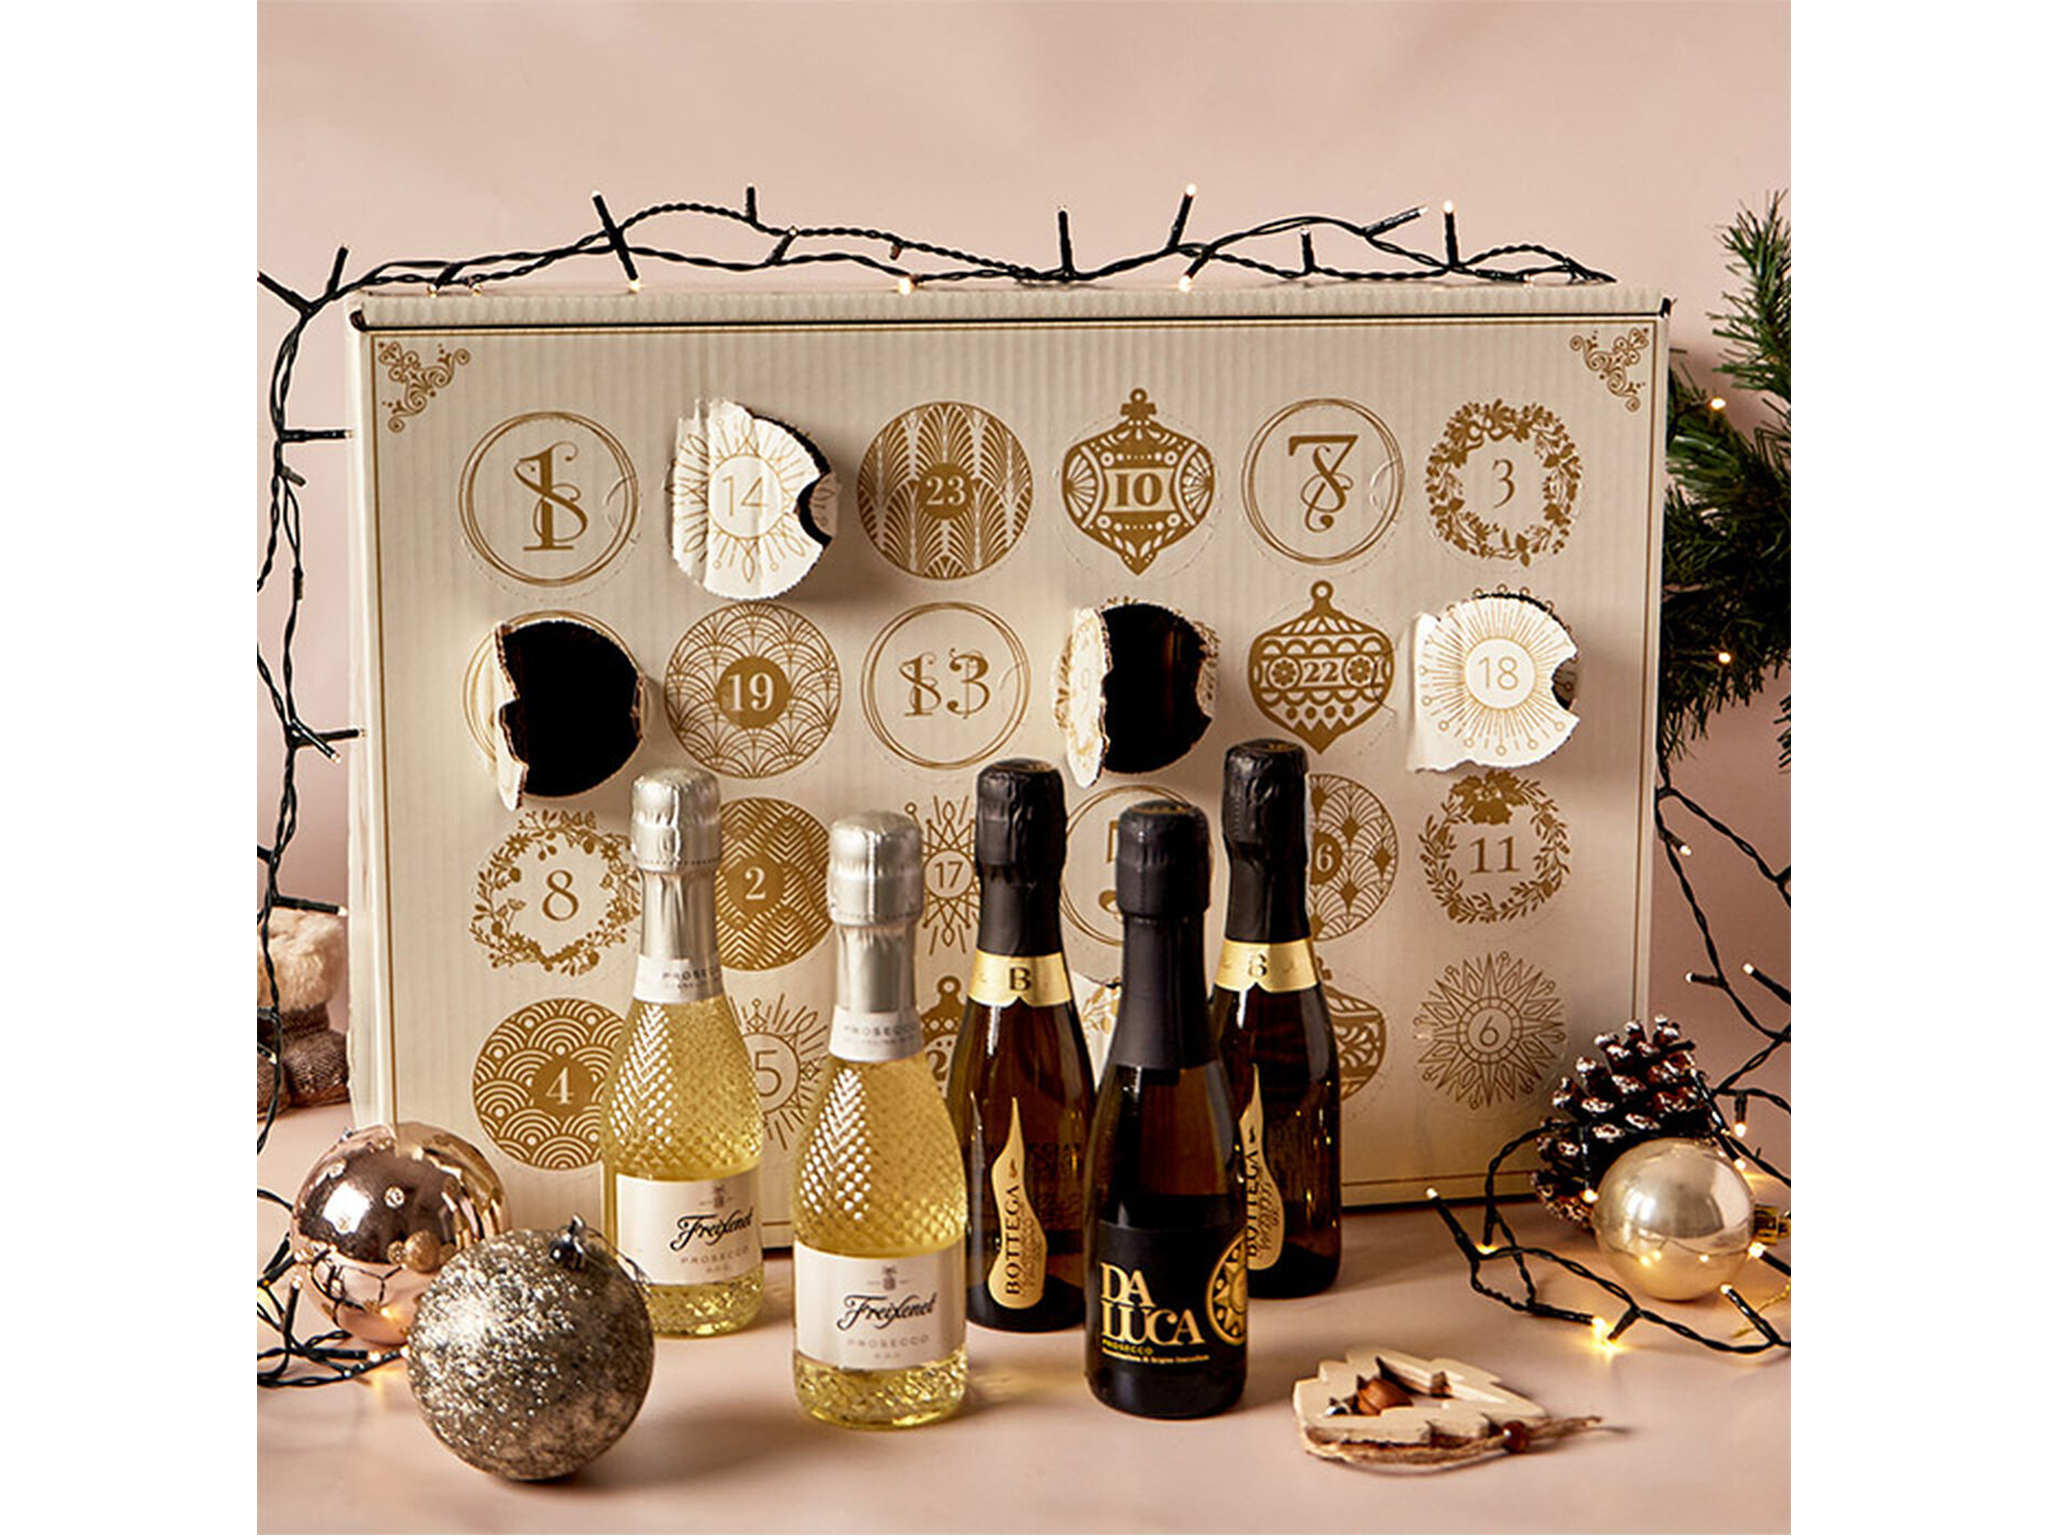 Getting Personal prosecco & champagne advent calendar, Christmas exclusive